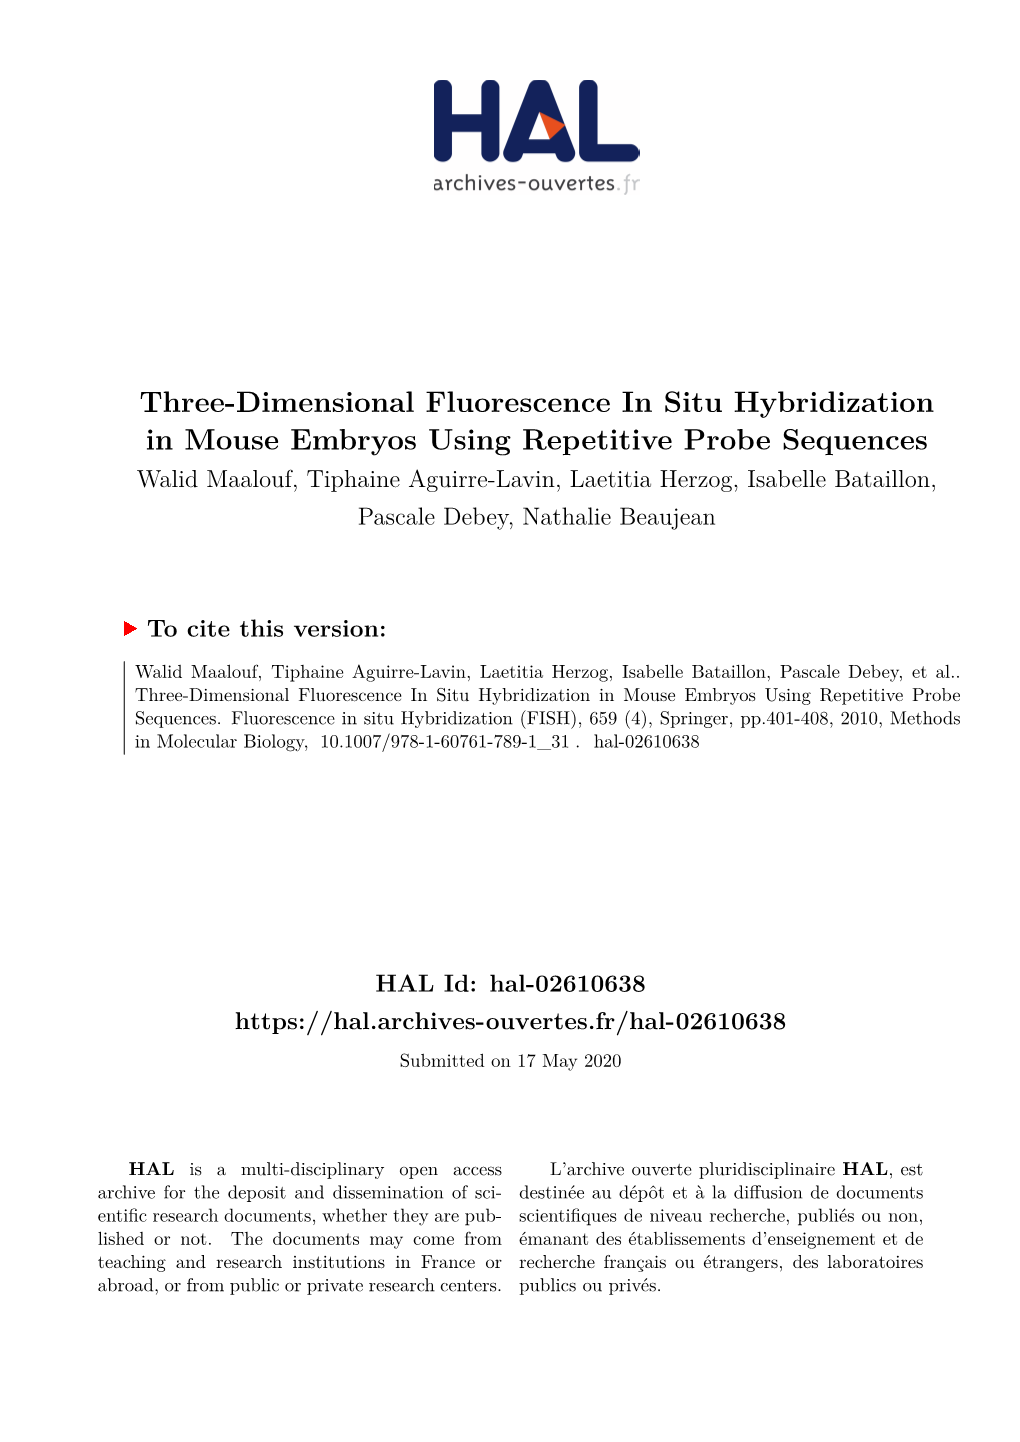 Three-Dimensional Fluorescence in Situ Hybridization in Mouse